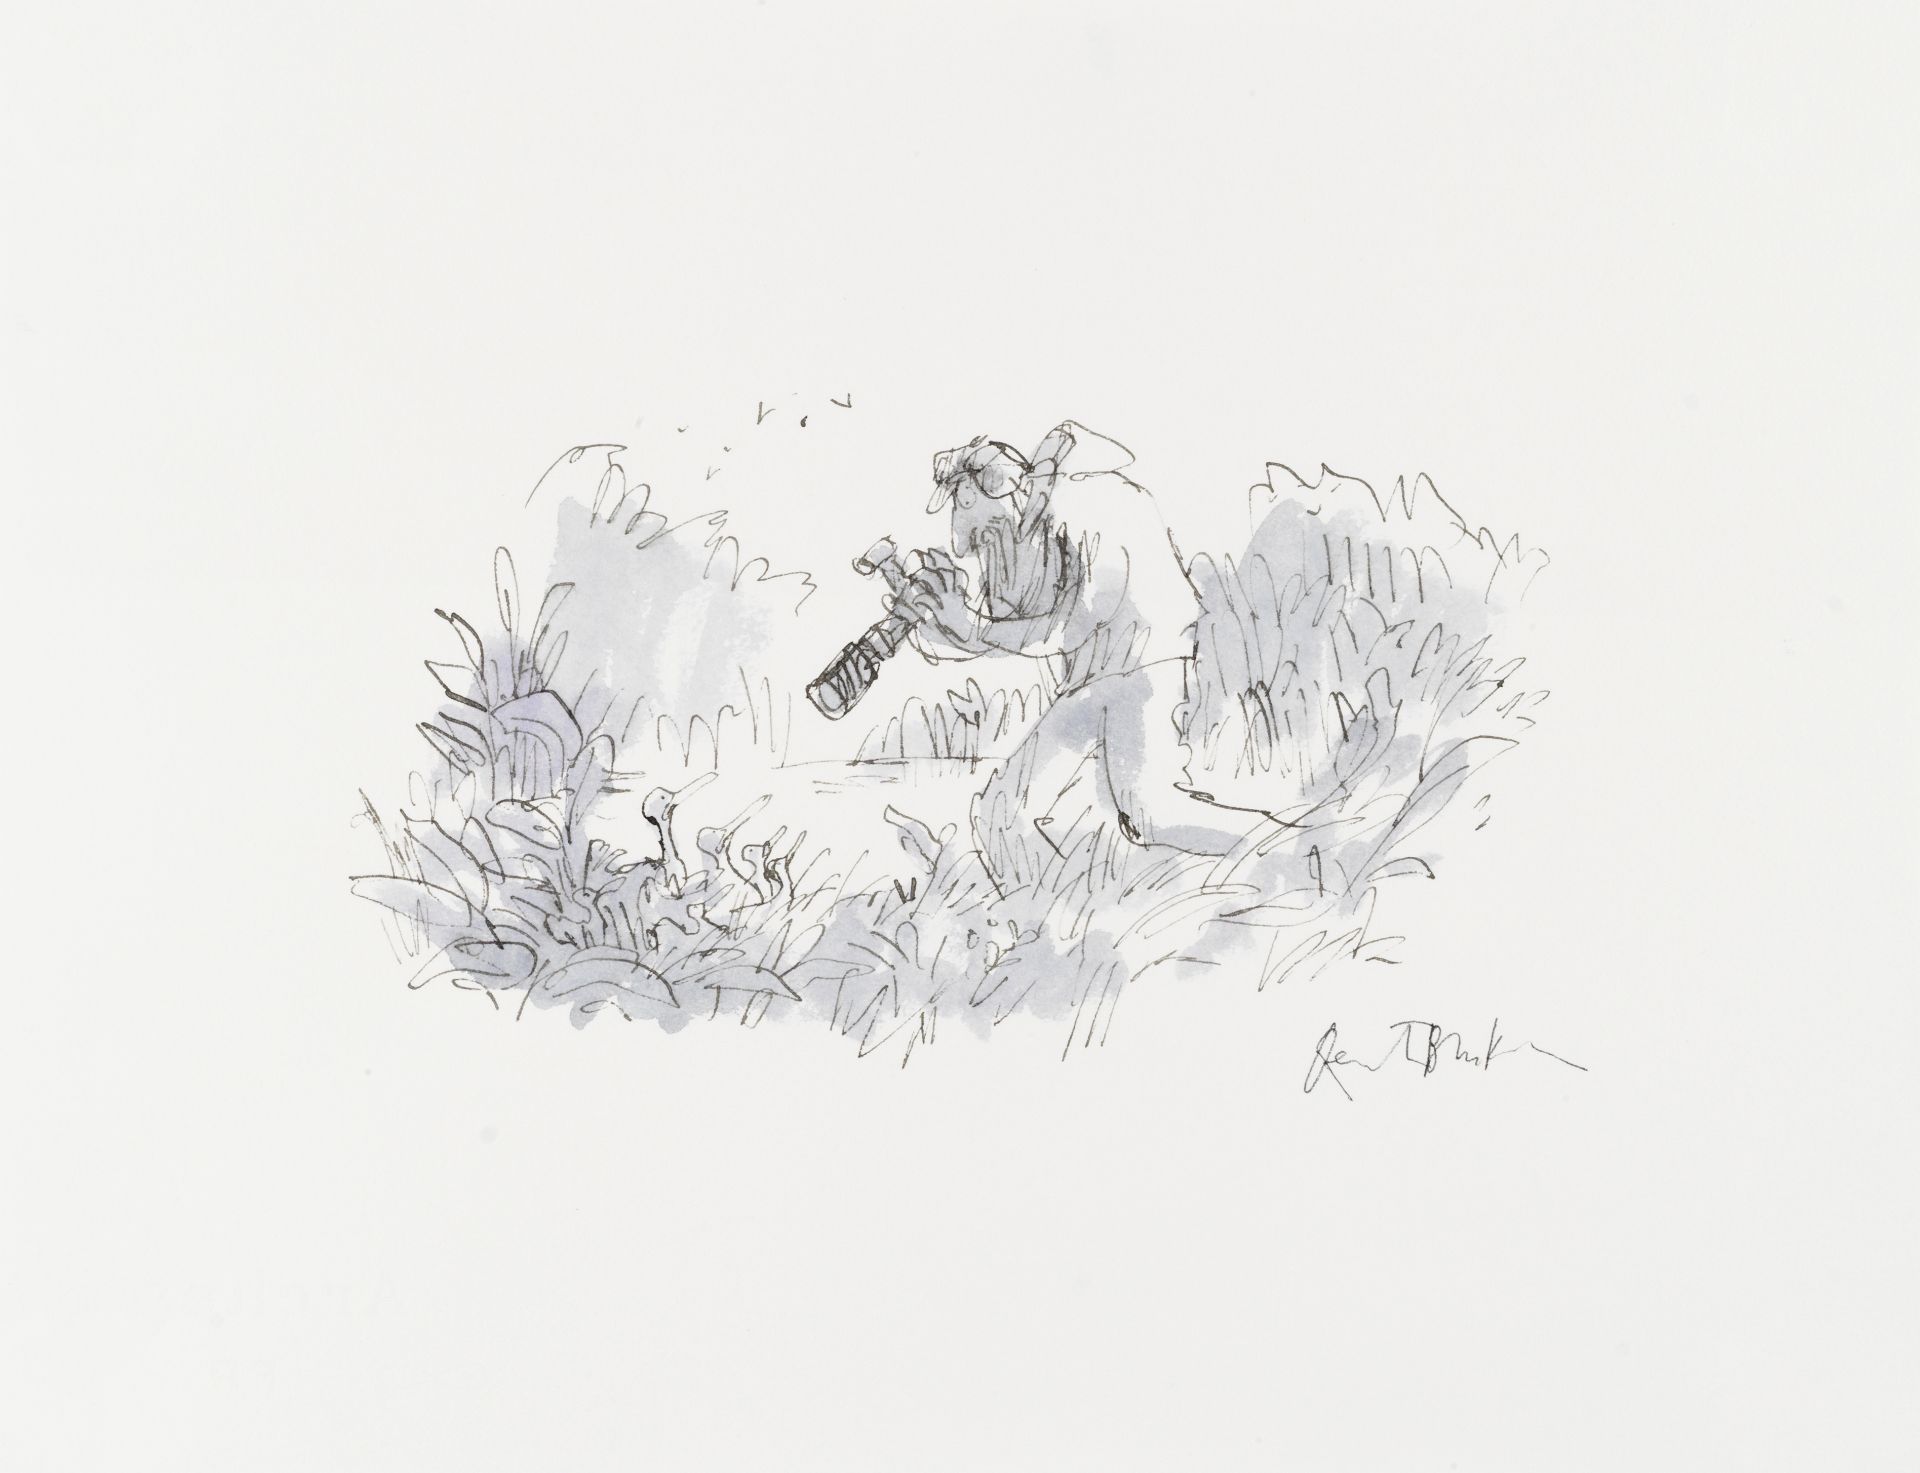 Sir Quentin Blake (British, born 1932) Wildlife Artists of the Year (unframed) (Executed in 2020)